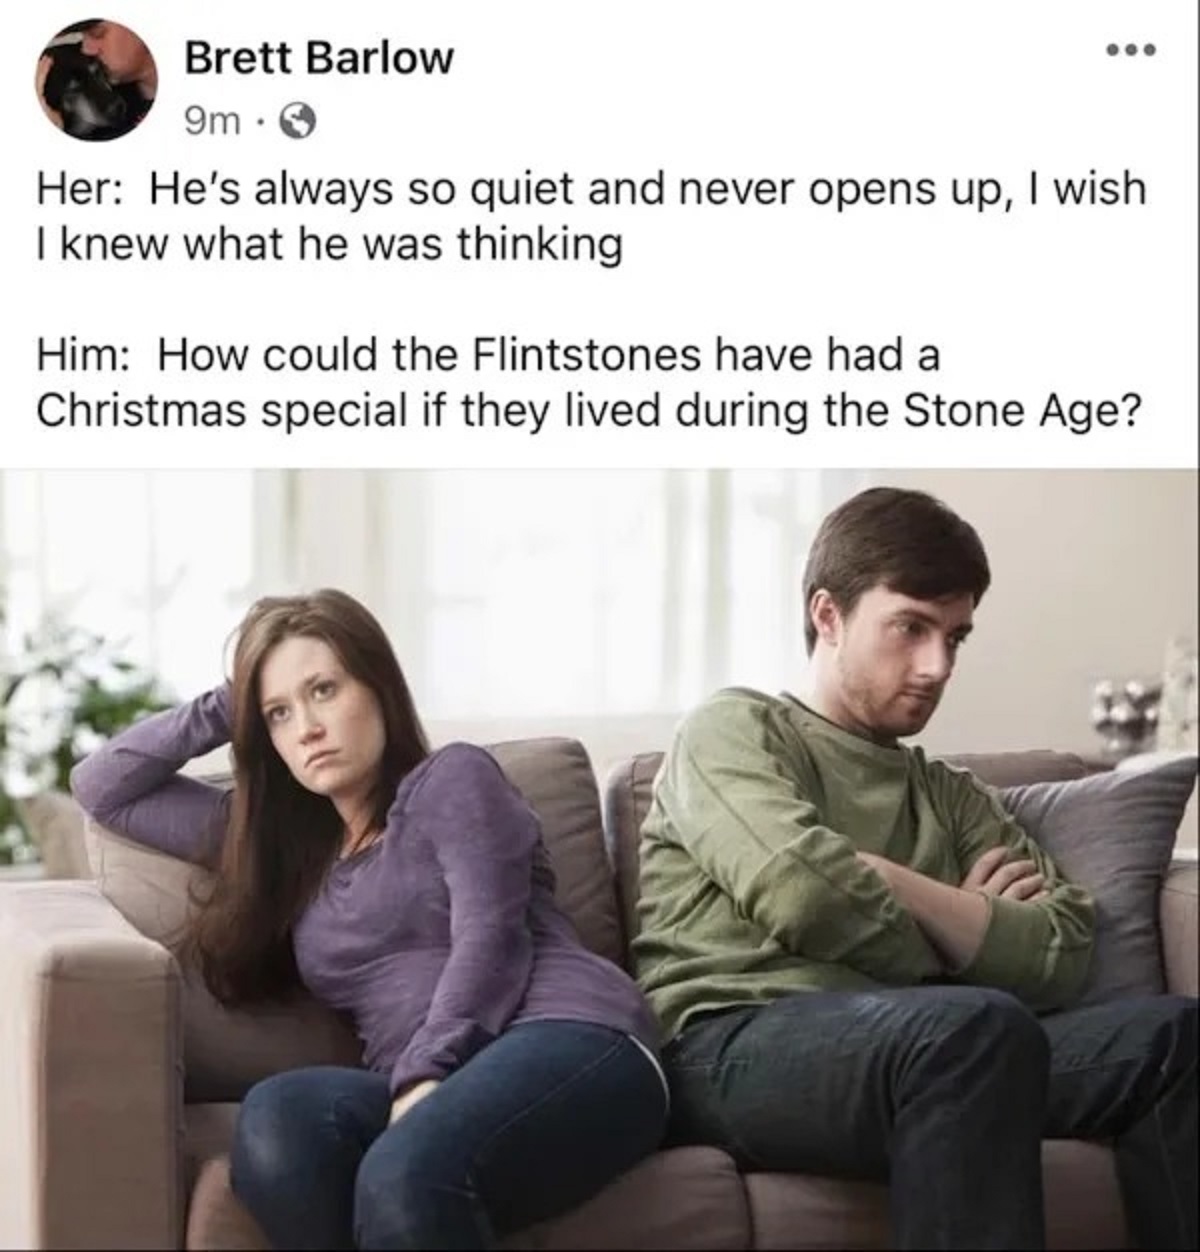 husband with another woman - Brett Barlow 9m. Her He's always so quiet and never opens up, I wish I knew what he was thinking Him How could the Flintstones have had a Christmas special if they lived during the Stone Age?